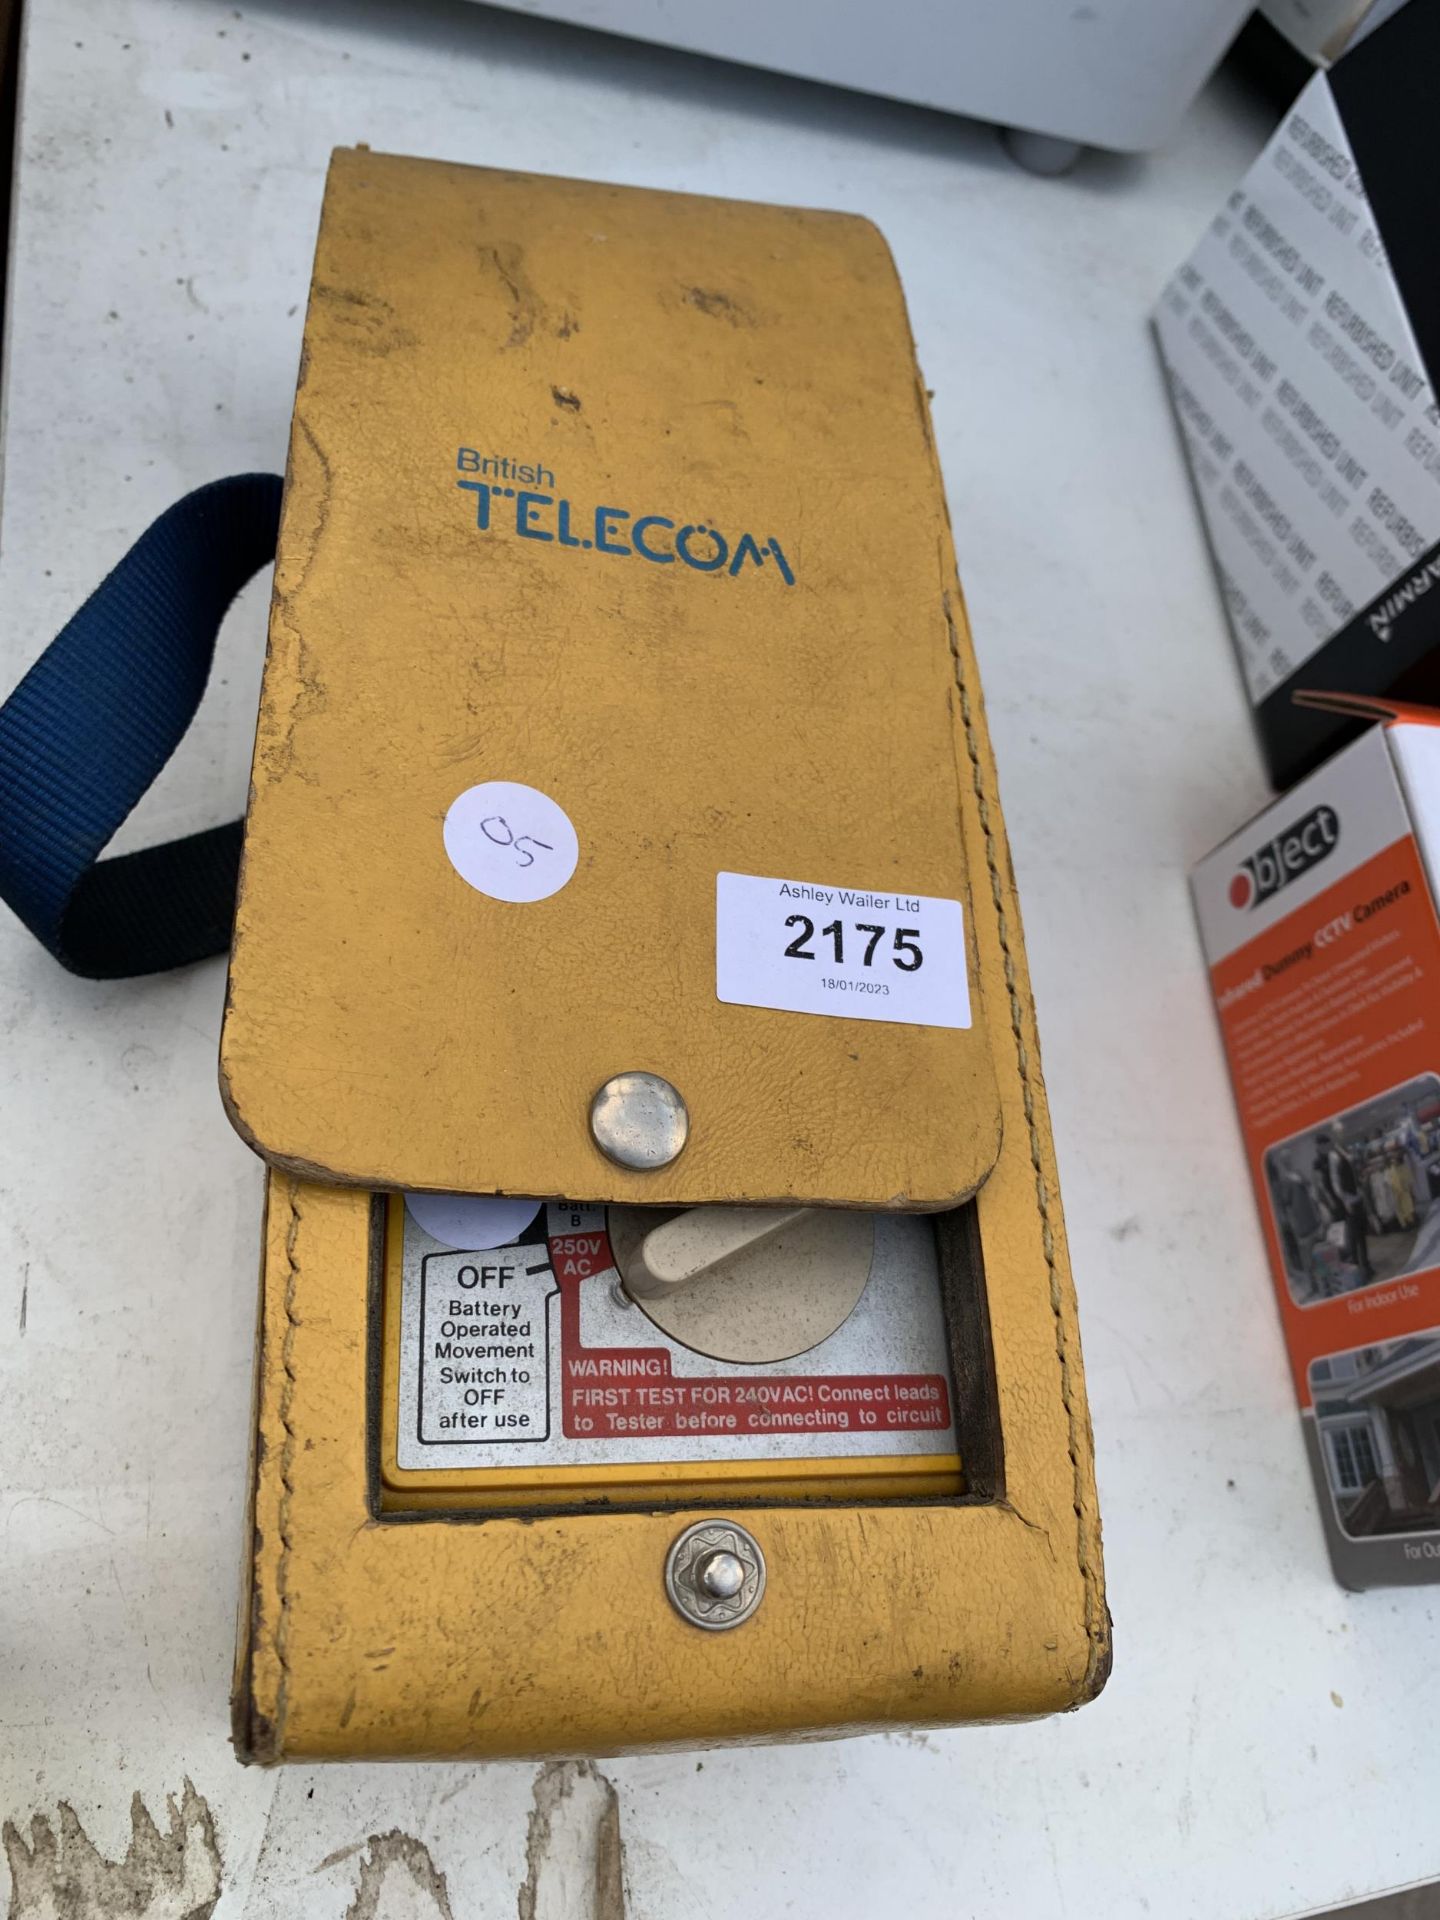 A CASED BRIITISH TELECOM TESTER - Image 2 of 2